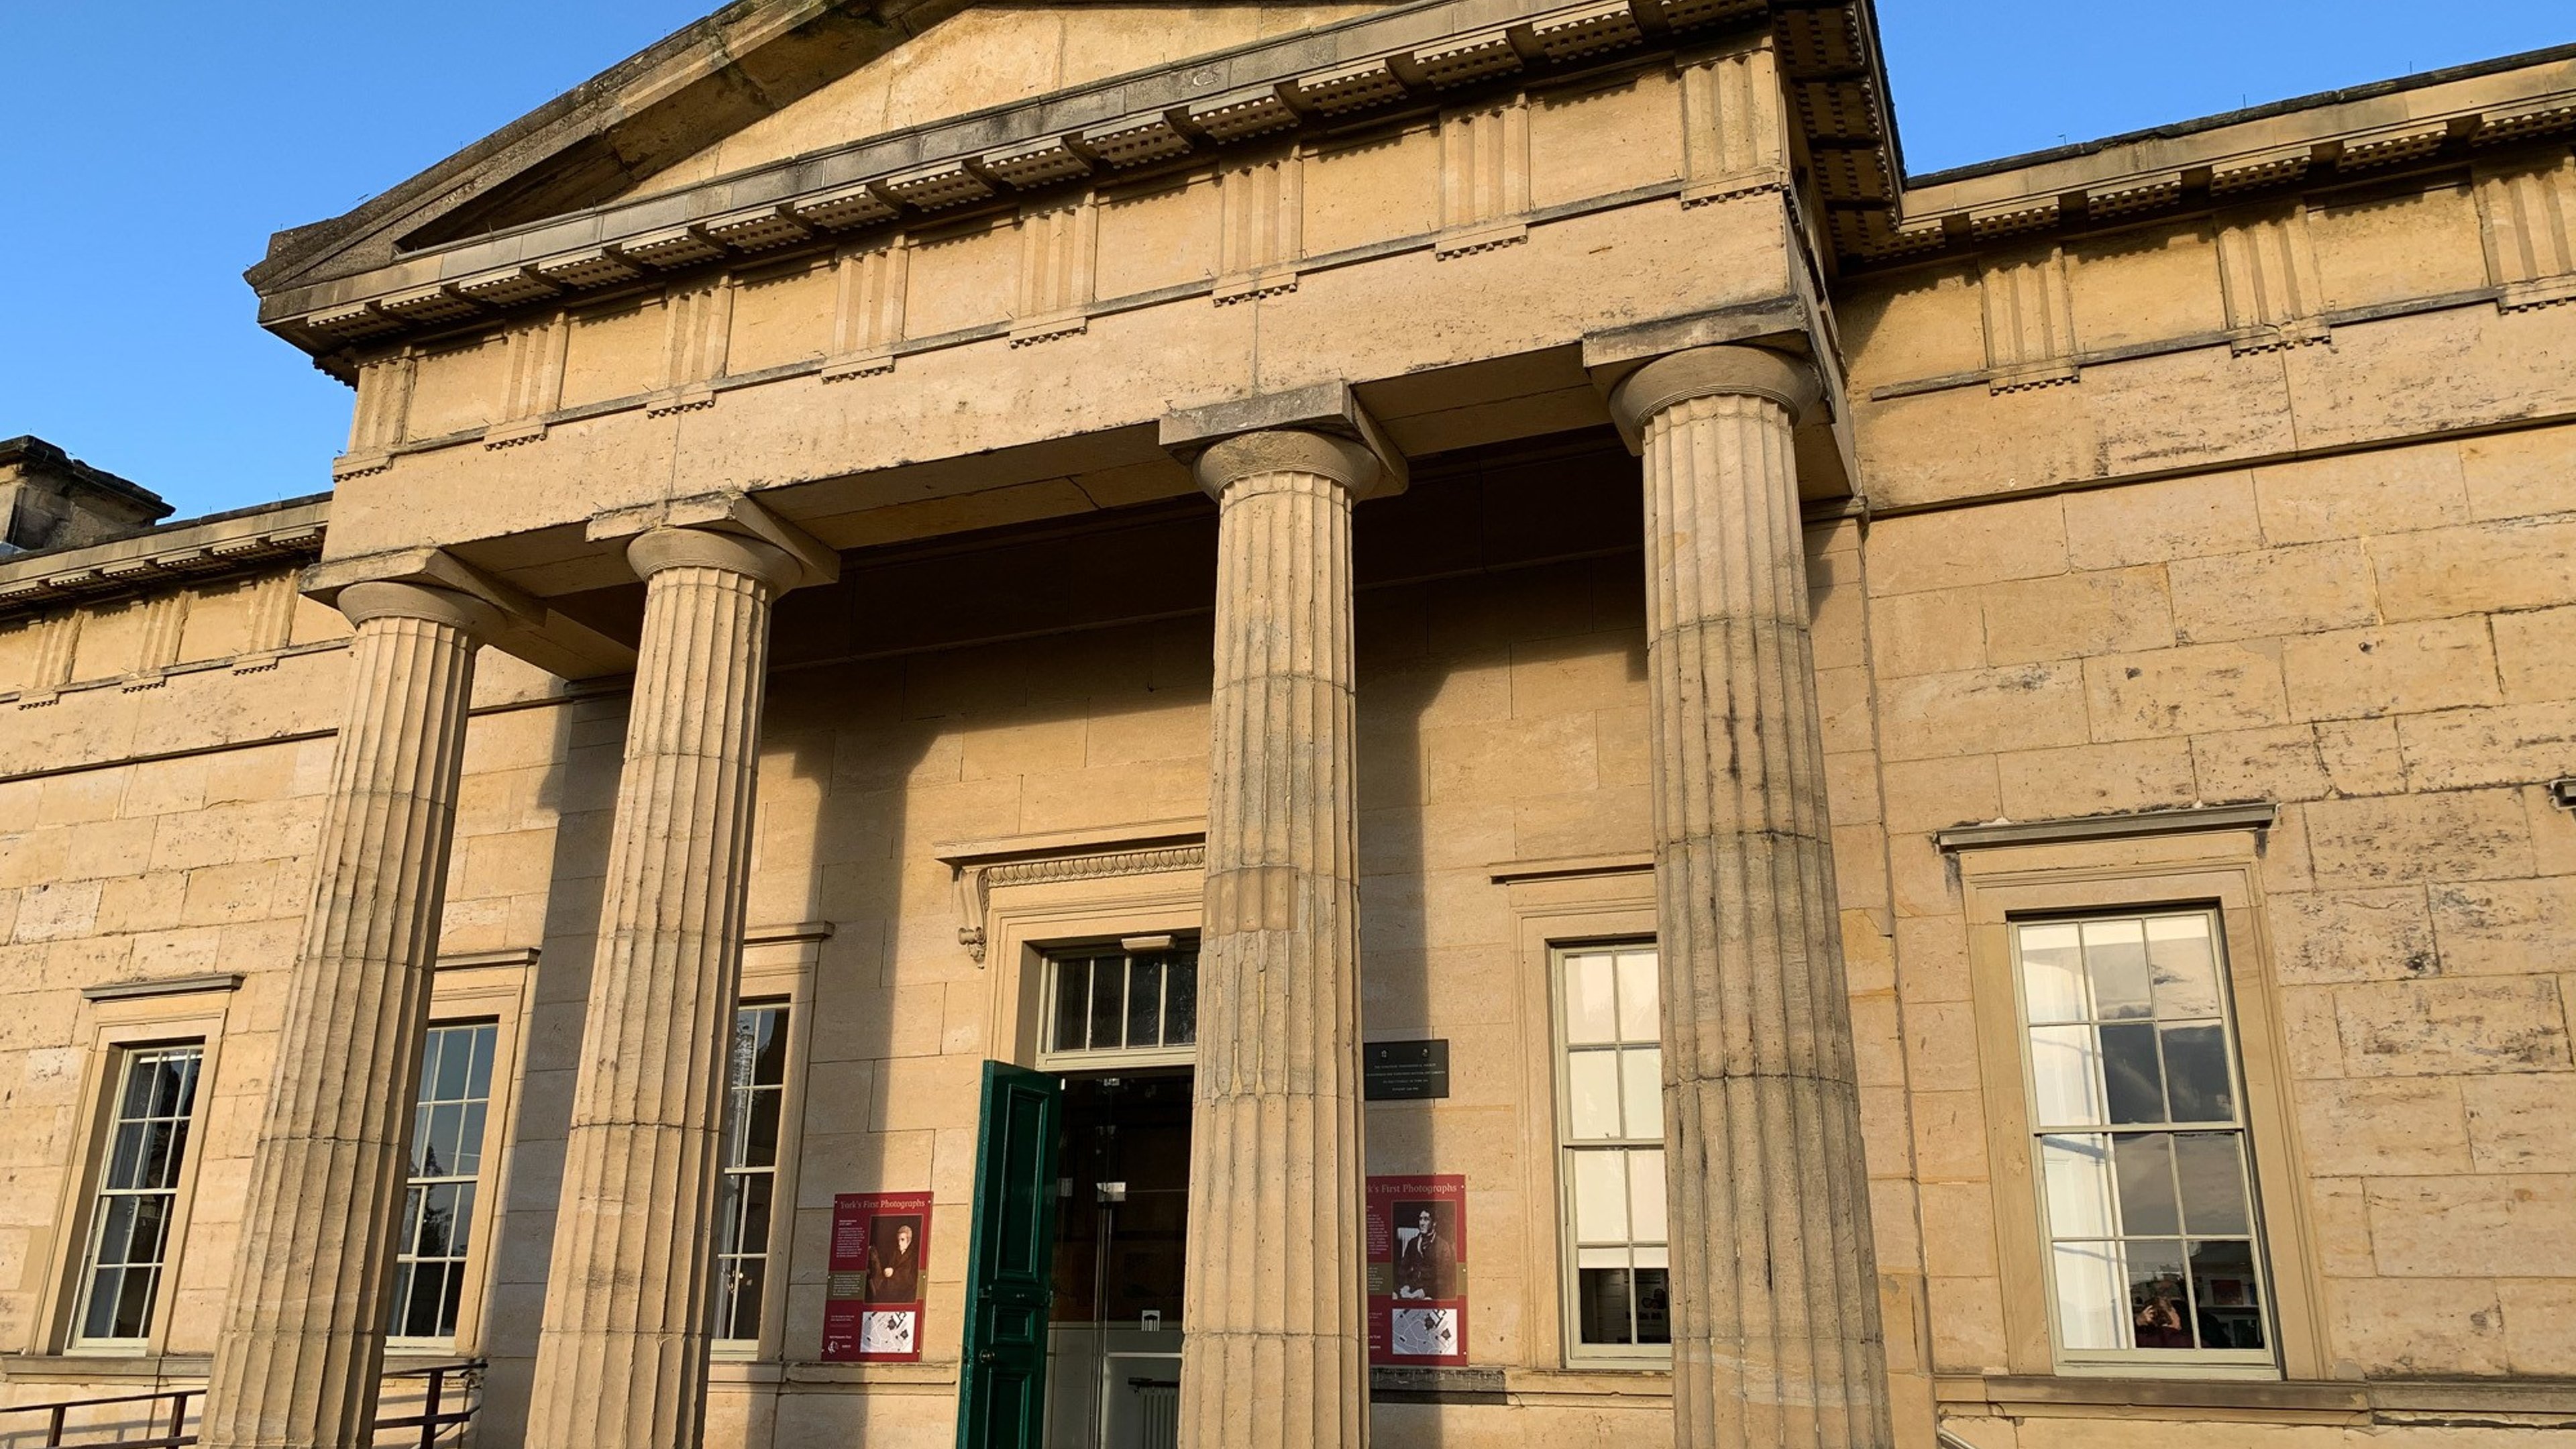 The Yorkshire Museum